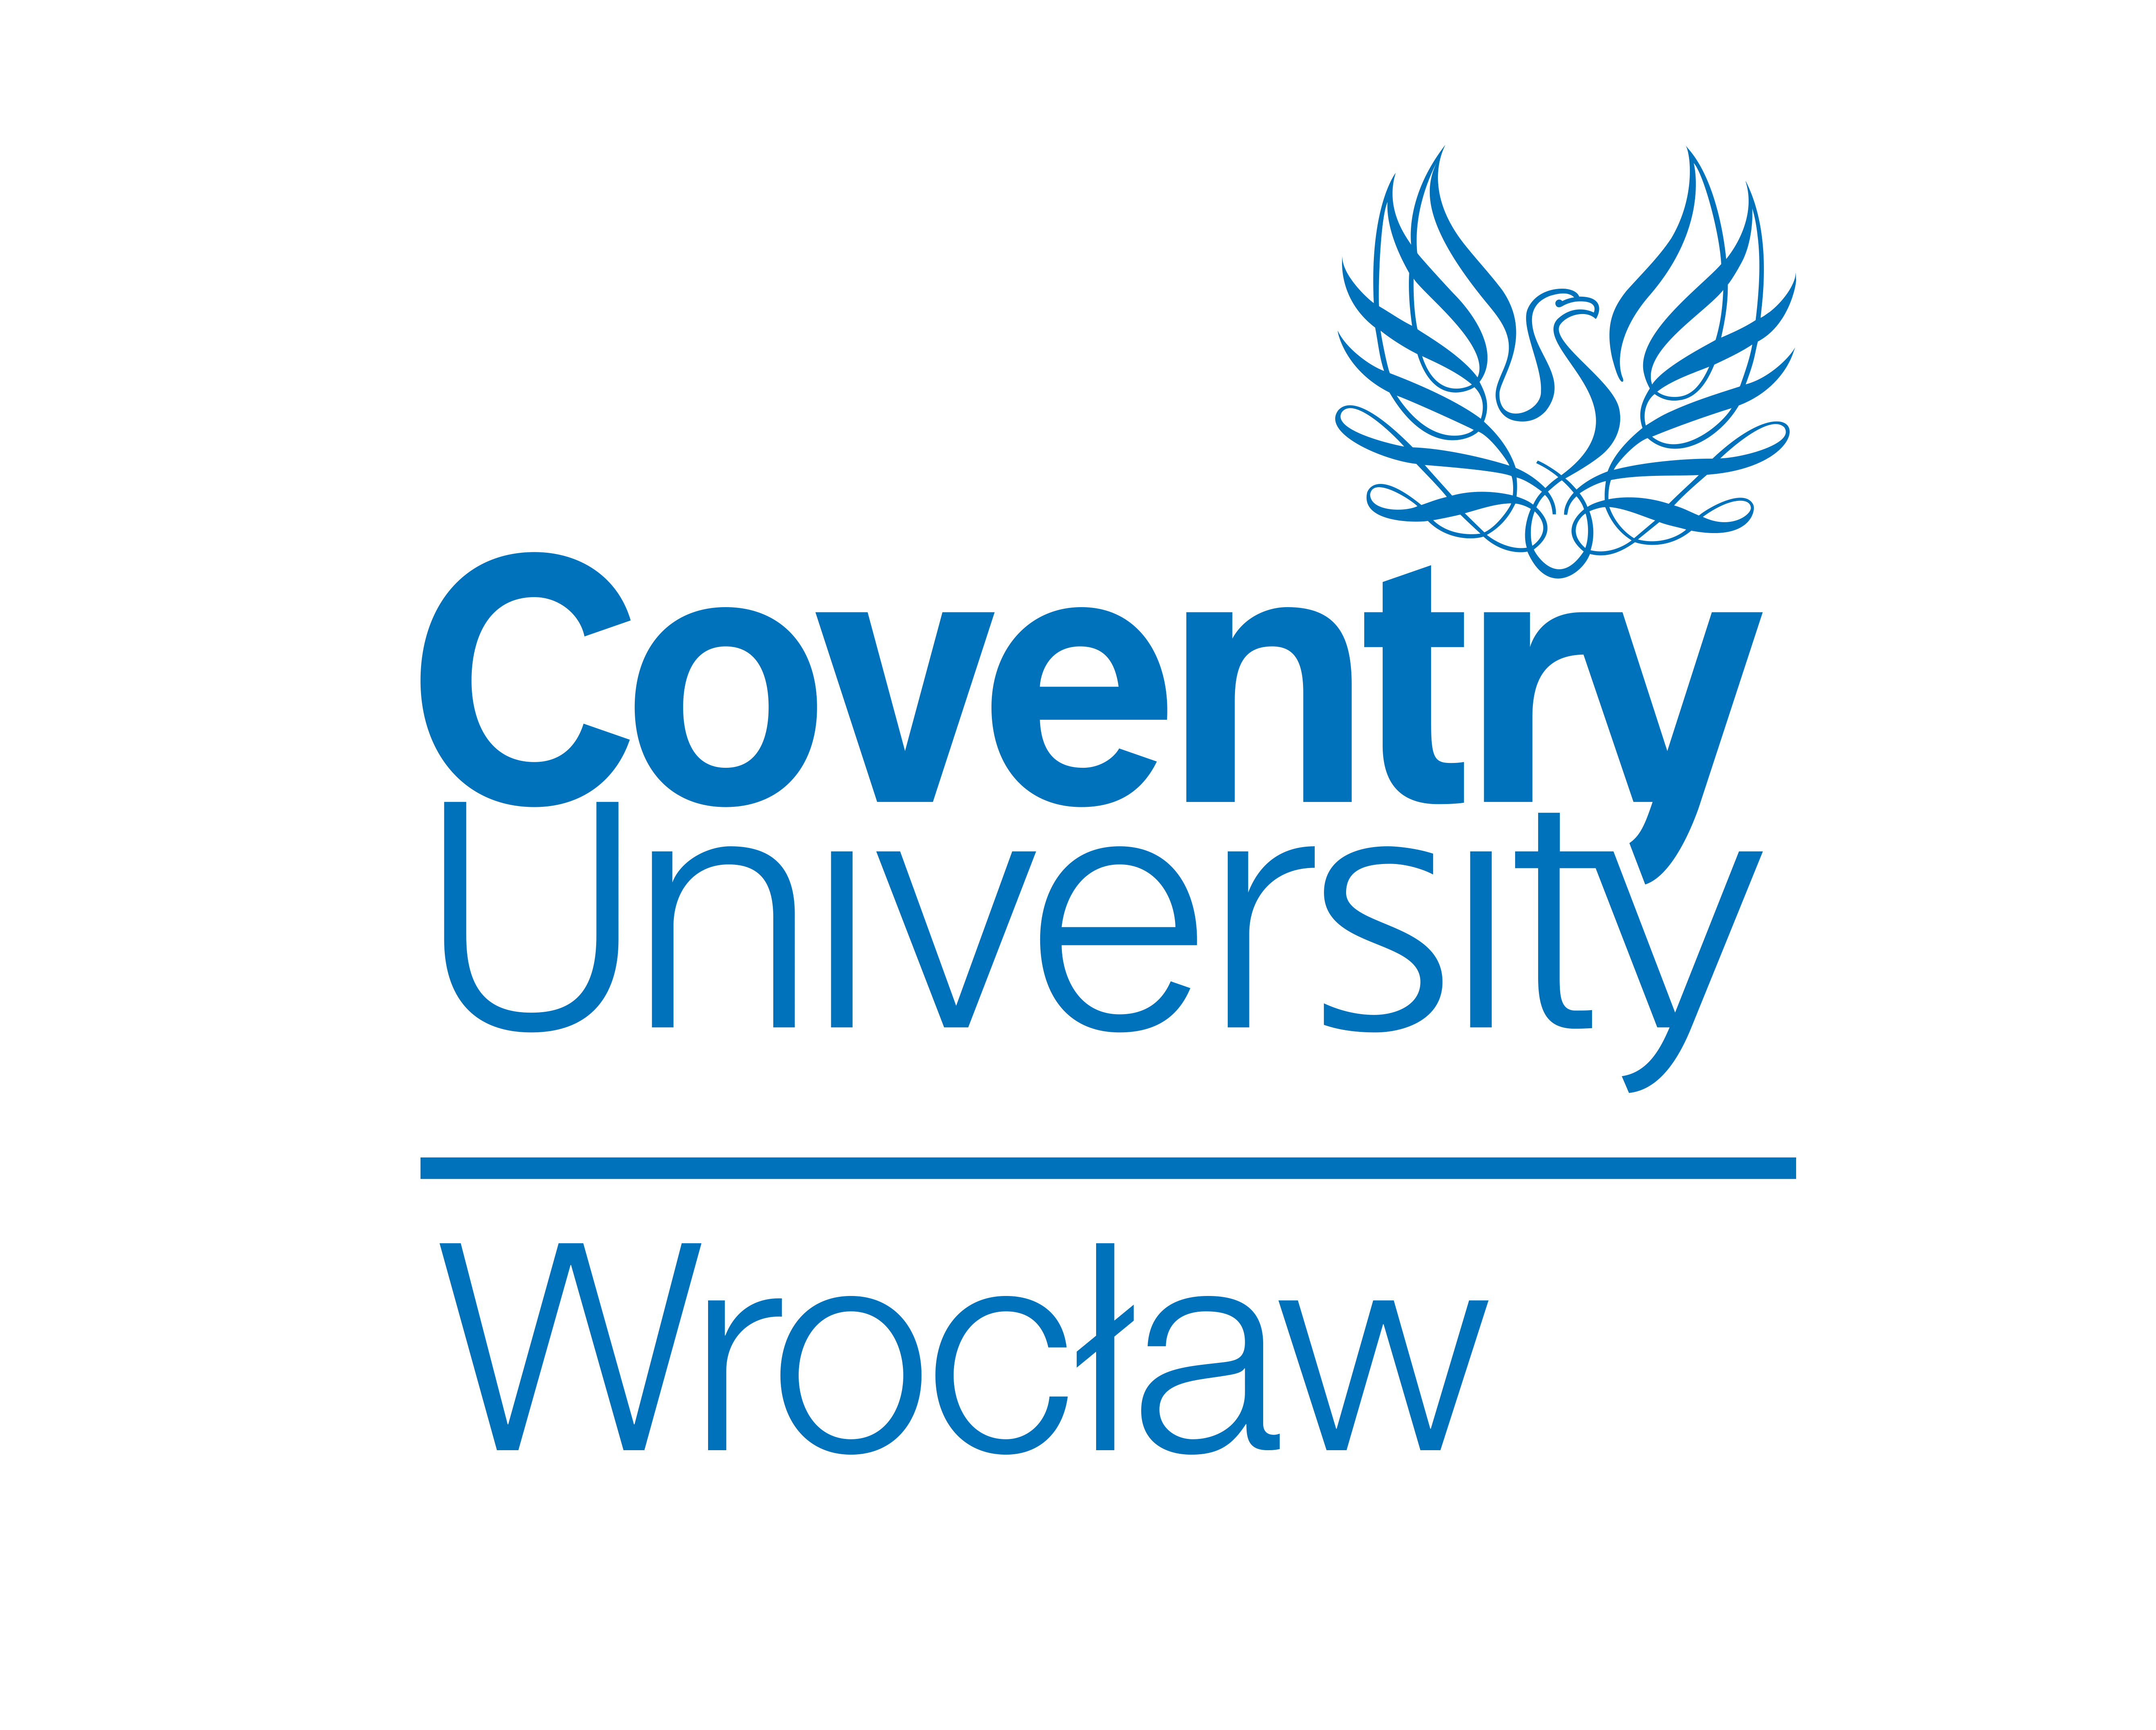 Coventry University, Wroclaw image